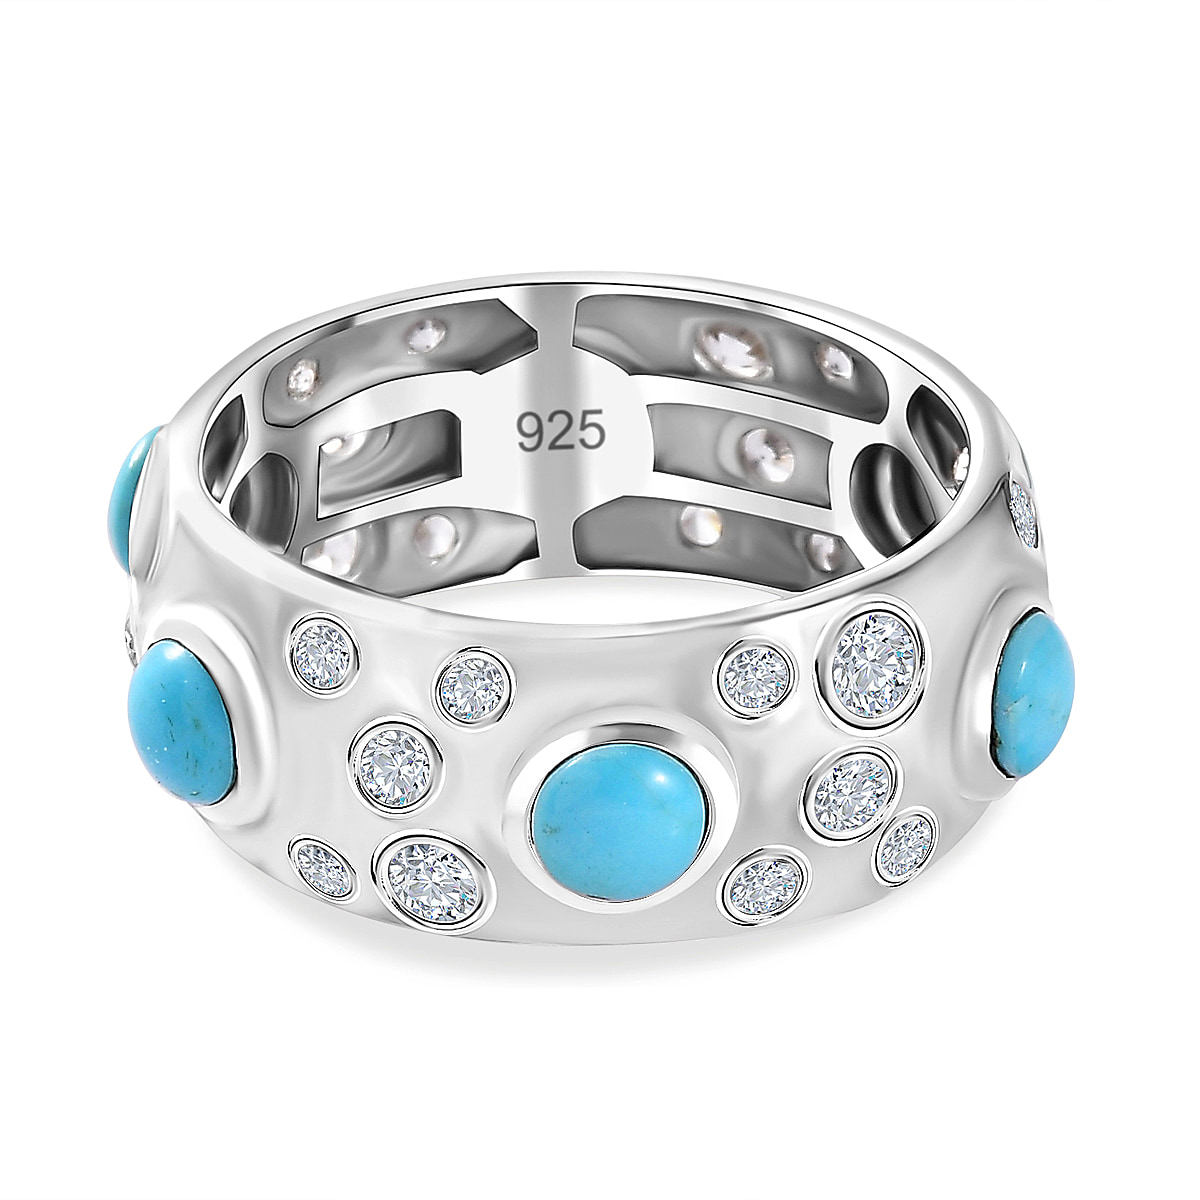 Arizona Sleeping Beauty Turquoise & Natural Zircon Band Ring in Platinum Overlay Sterling Silver 2.61 Ct